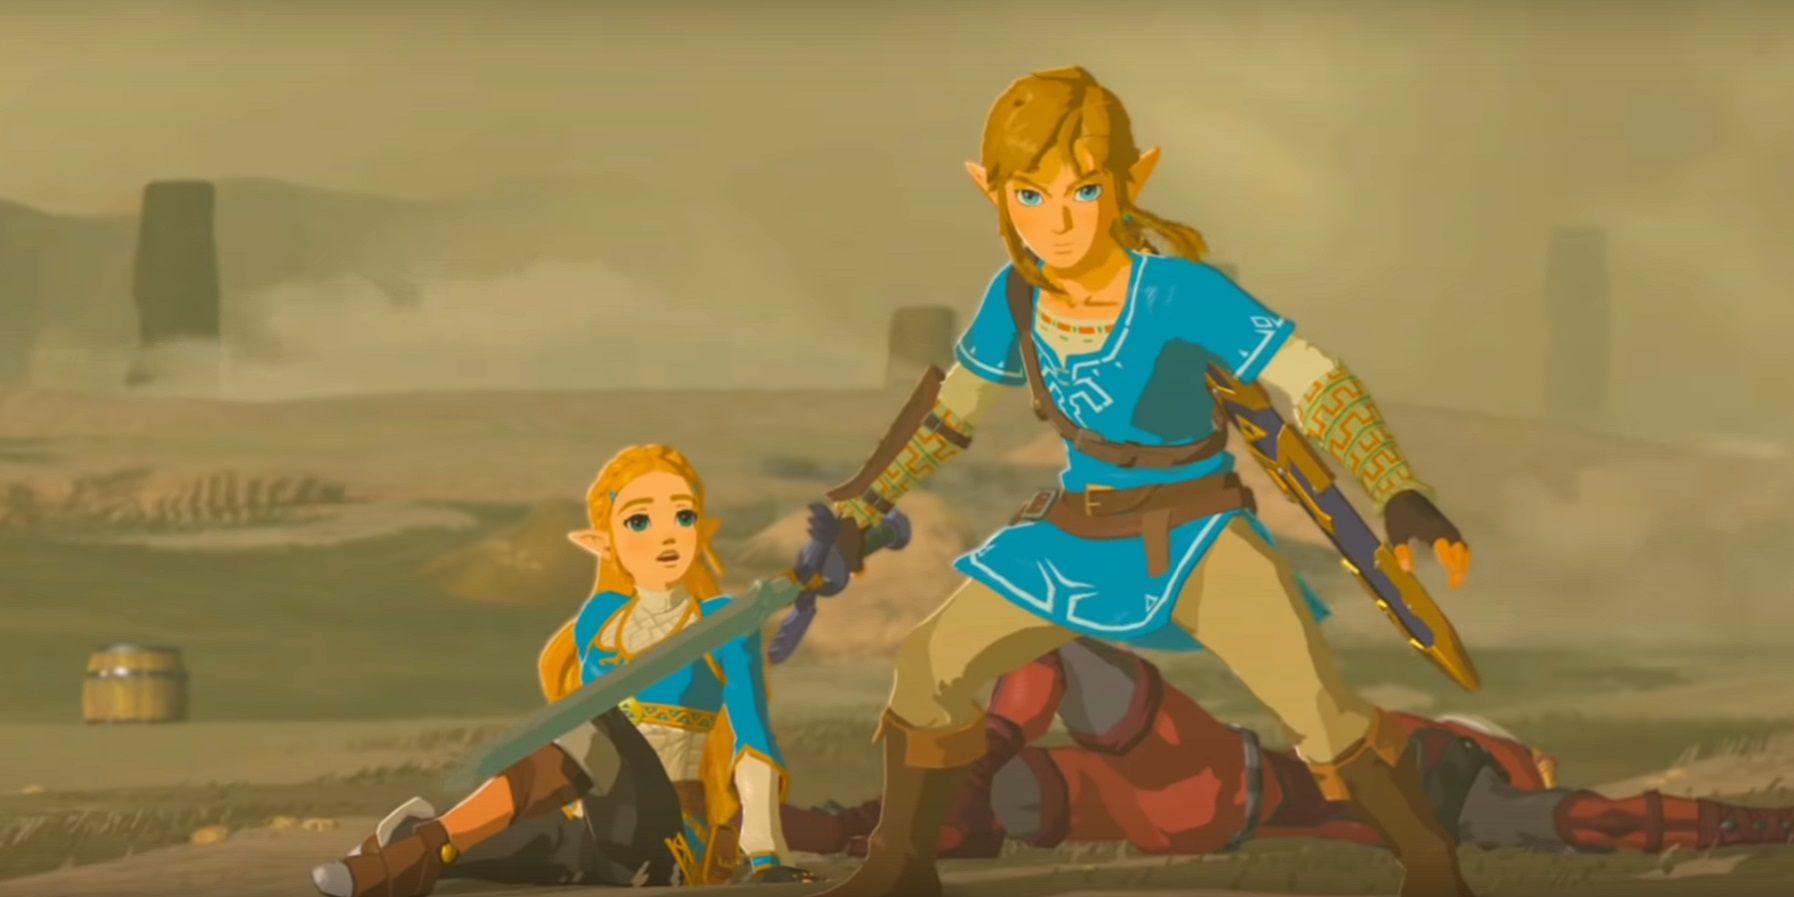 Link saves Zelda from an ambush in Zelda: Breath of the Wild, standing in front of her with sword poised, as she sits on the floor